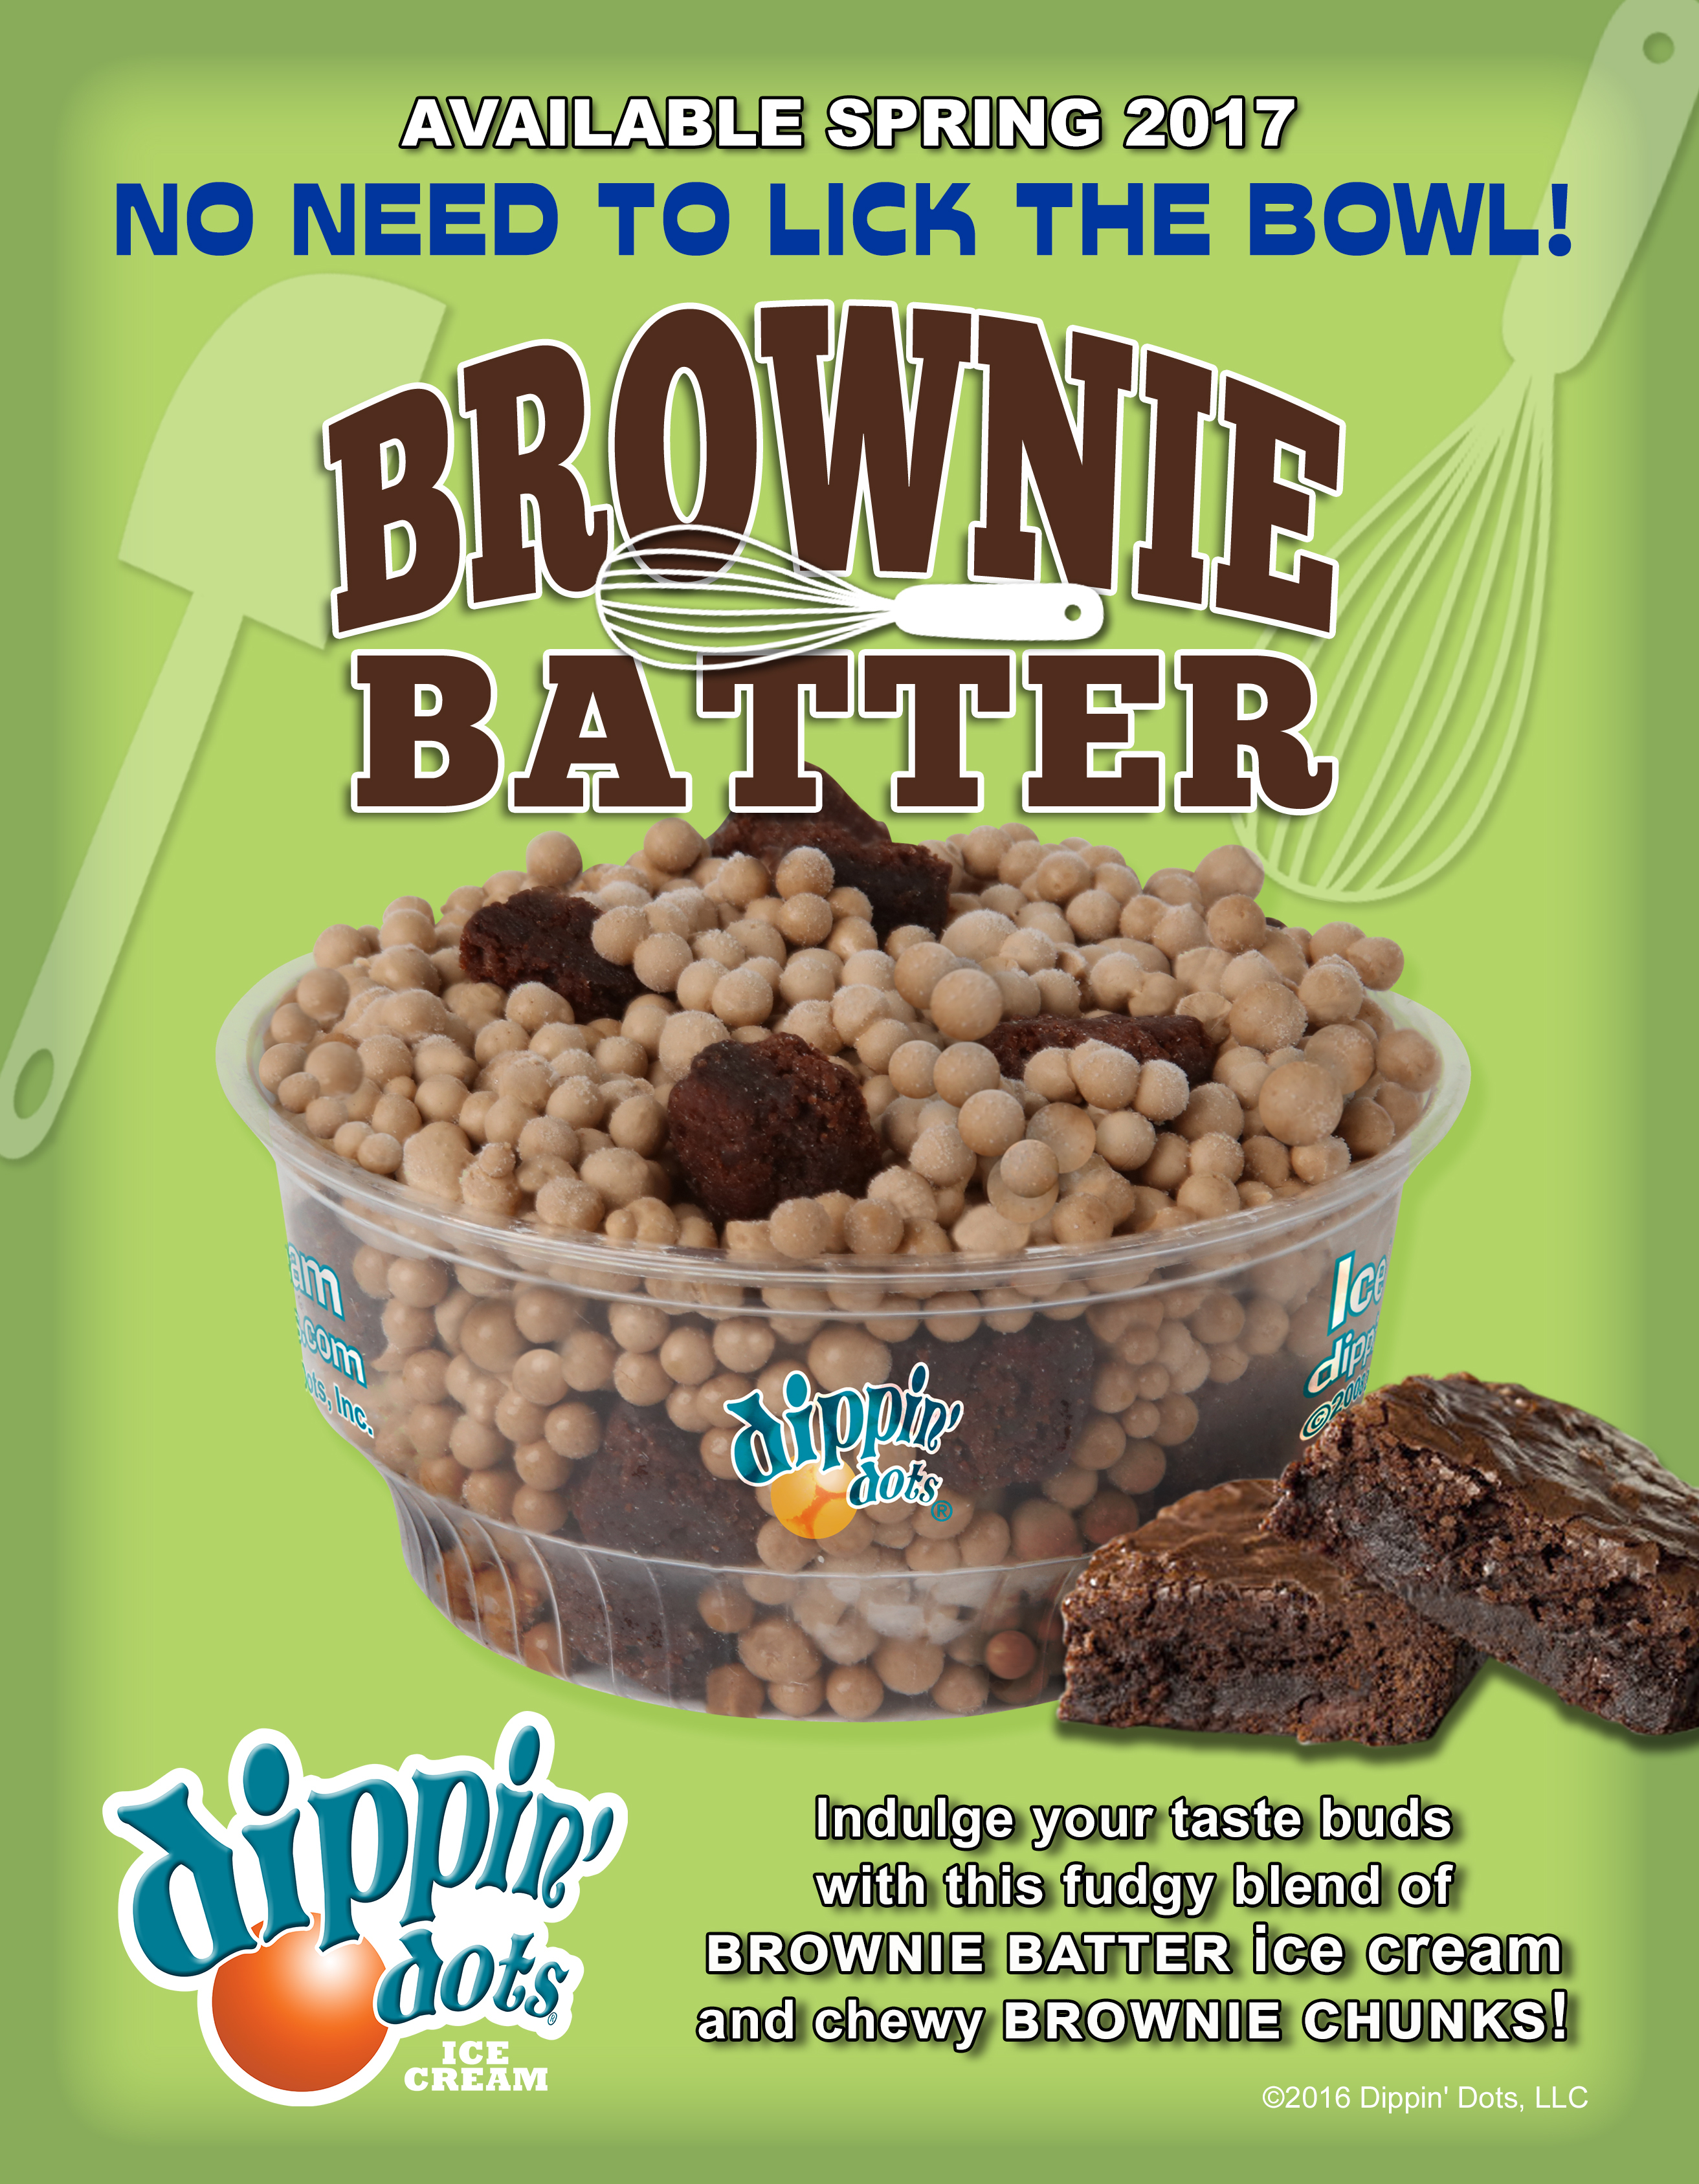 Dippin' Dots Debuts New Brownie Batter Ice Cream